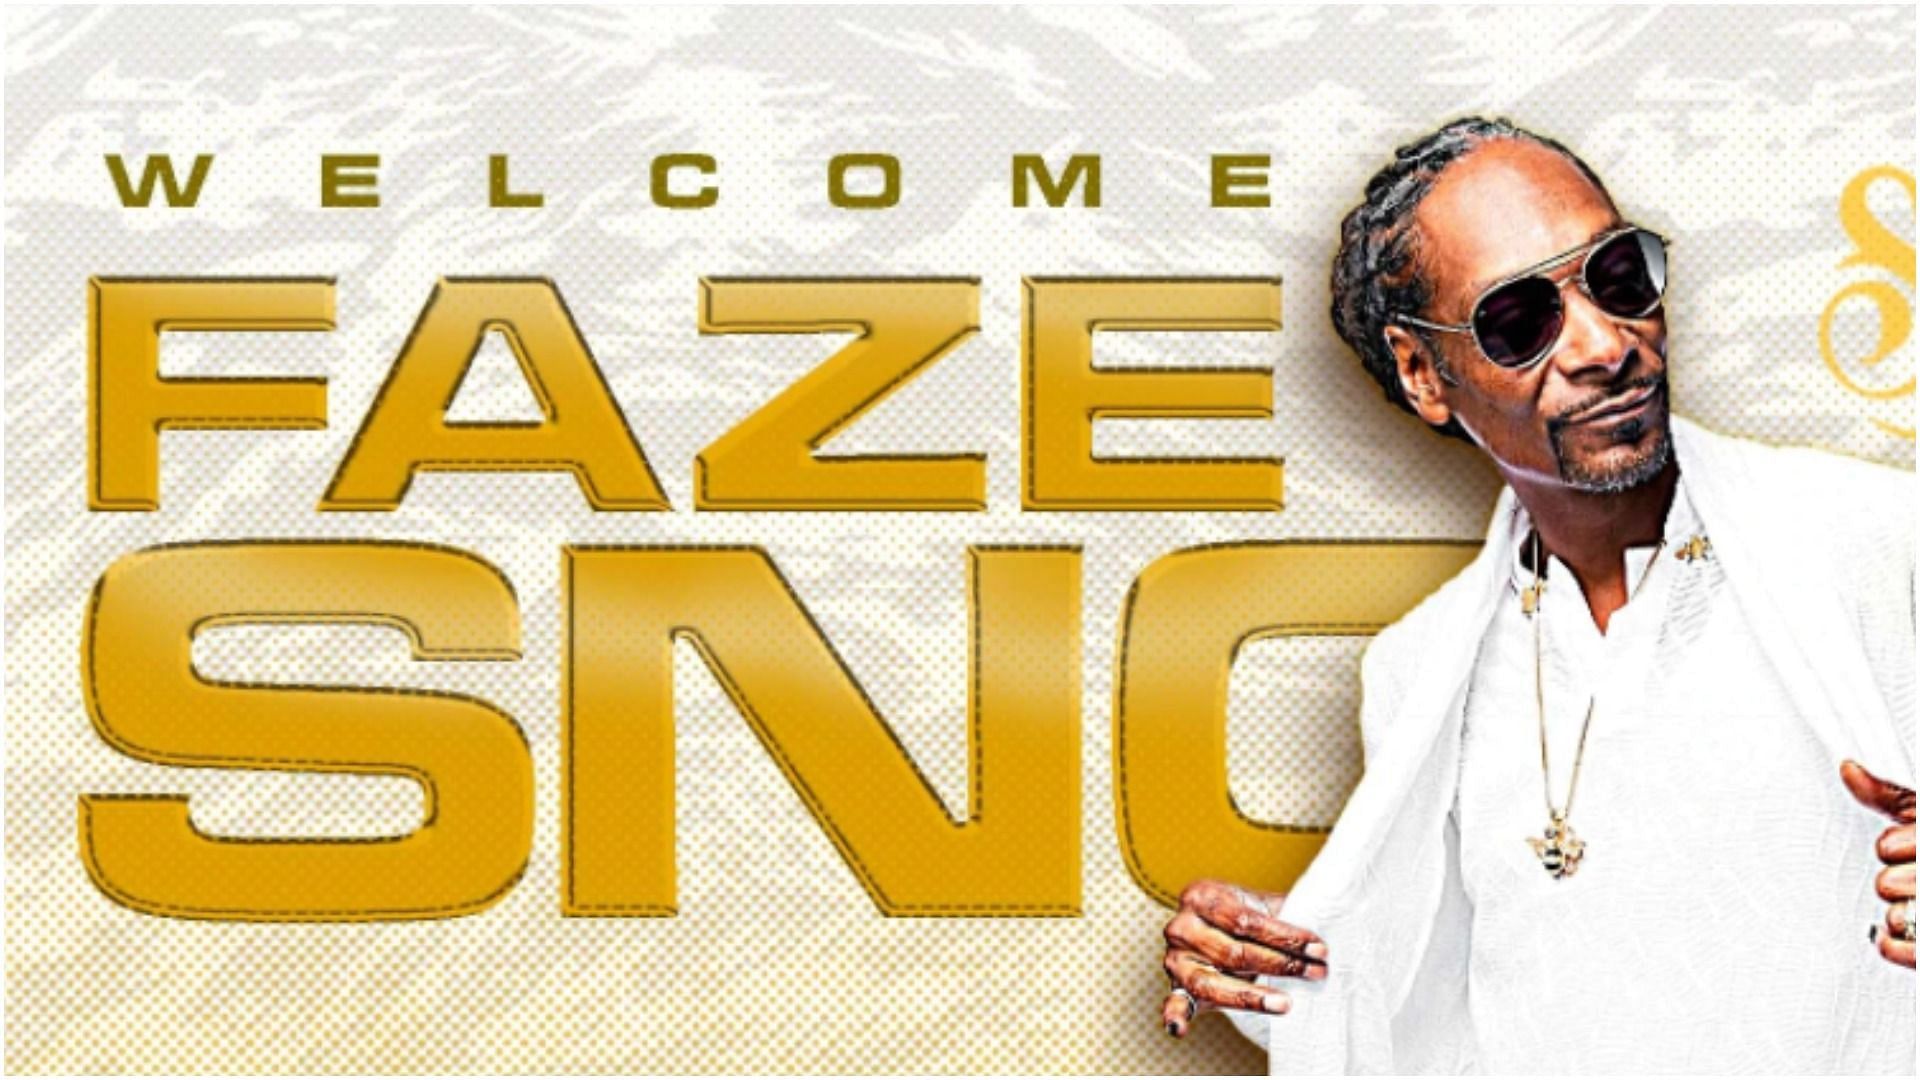 Snoop Dogg joins FaZe Clan as a Talent and a member of the board of directors (Image via FaZe Clan)